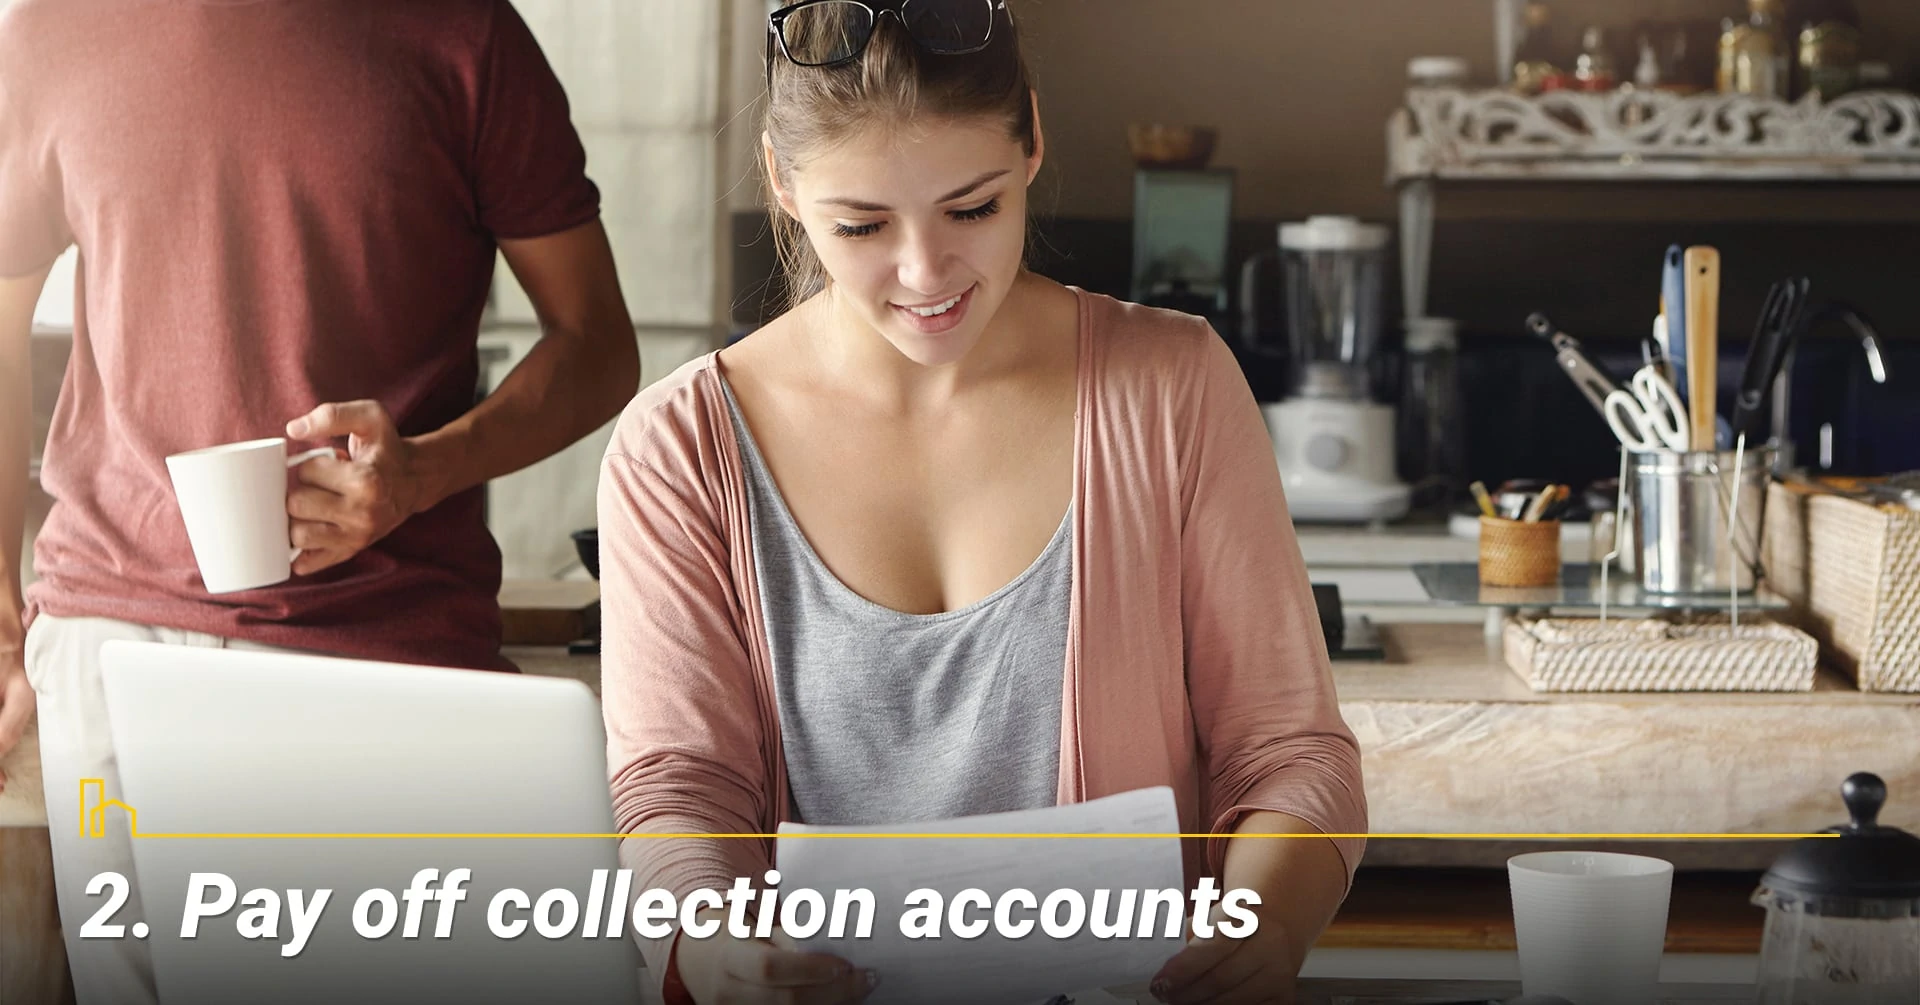 Pay off collection accounts, judgments and tax liens that have been placed on your credit report within the last 3 years. Pay off collection accounts